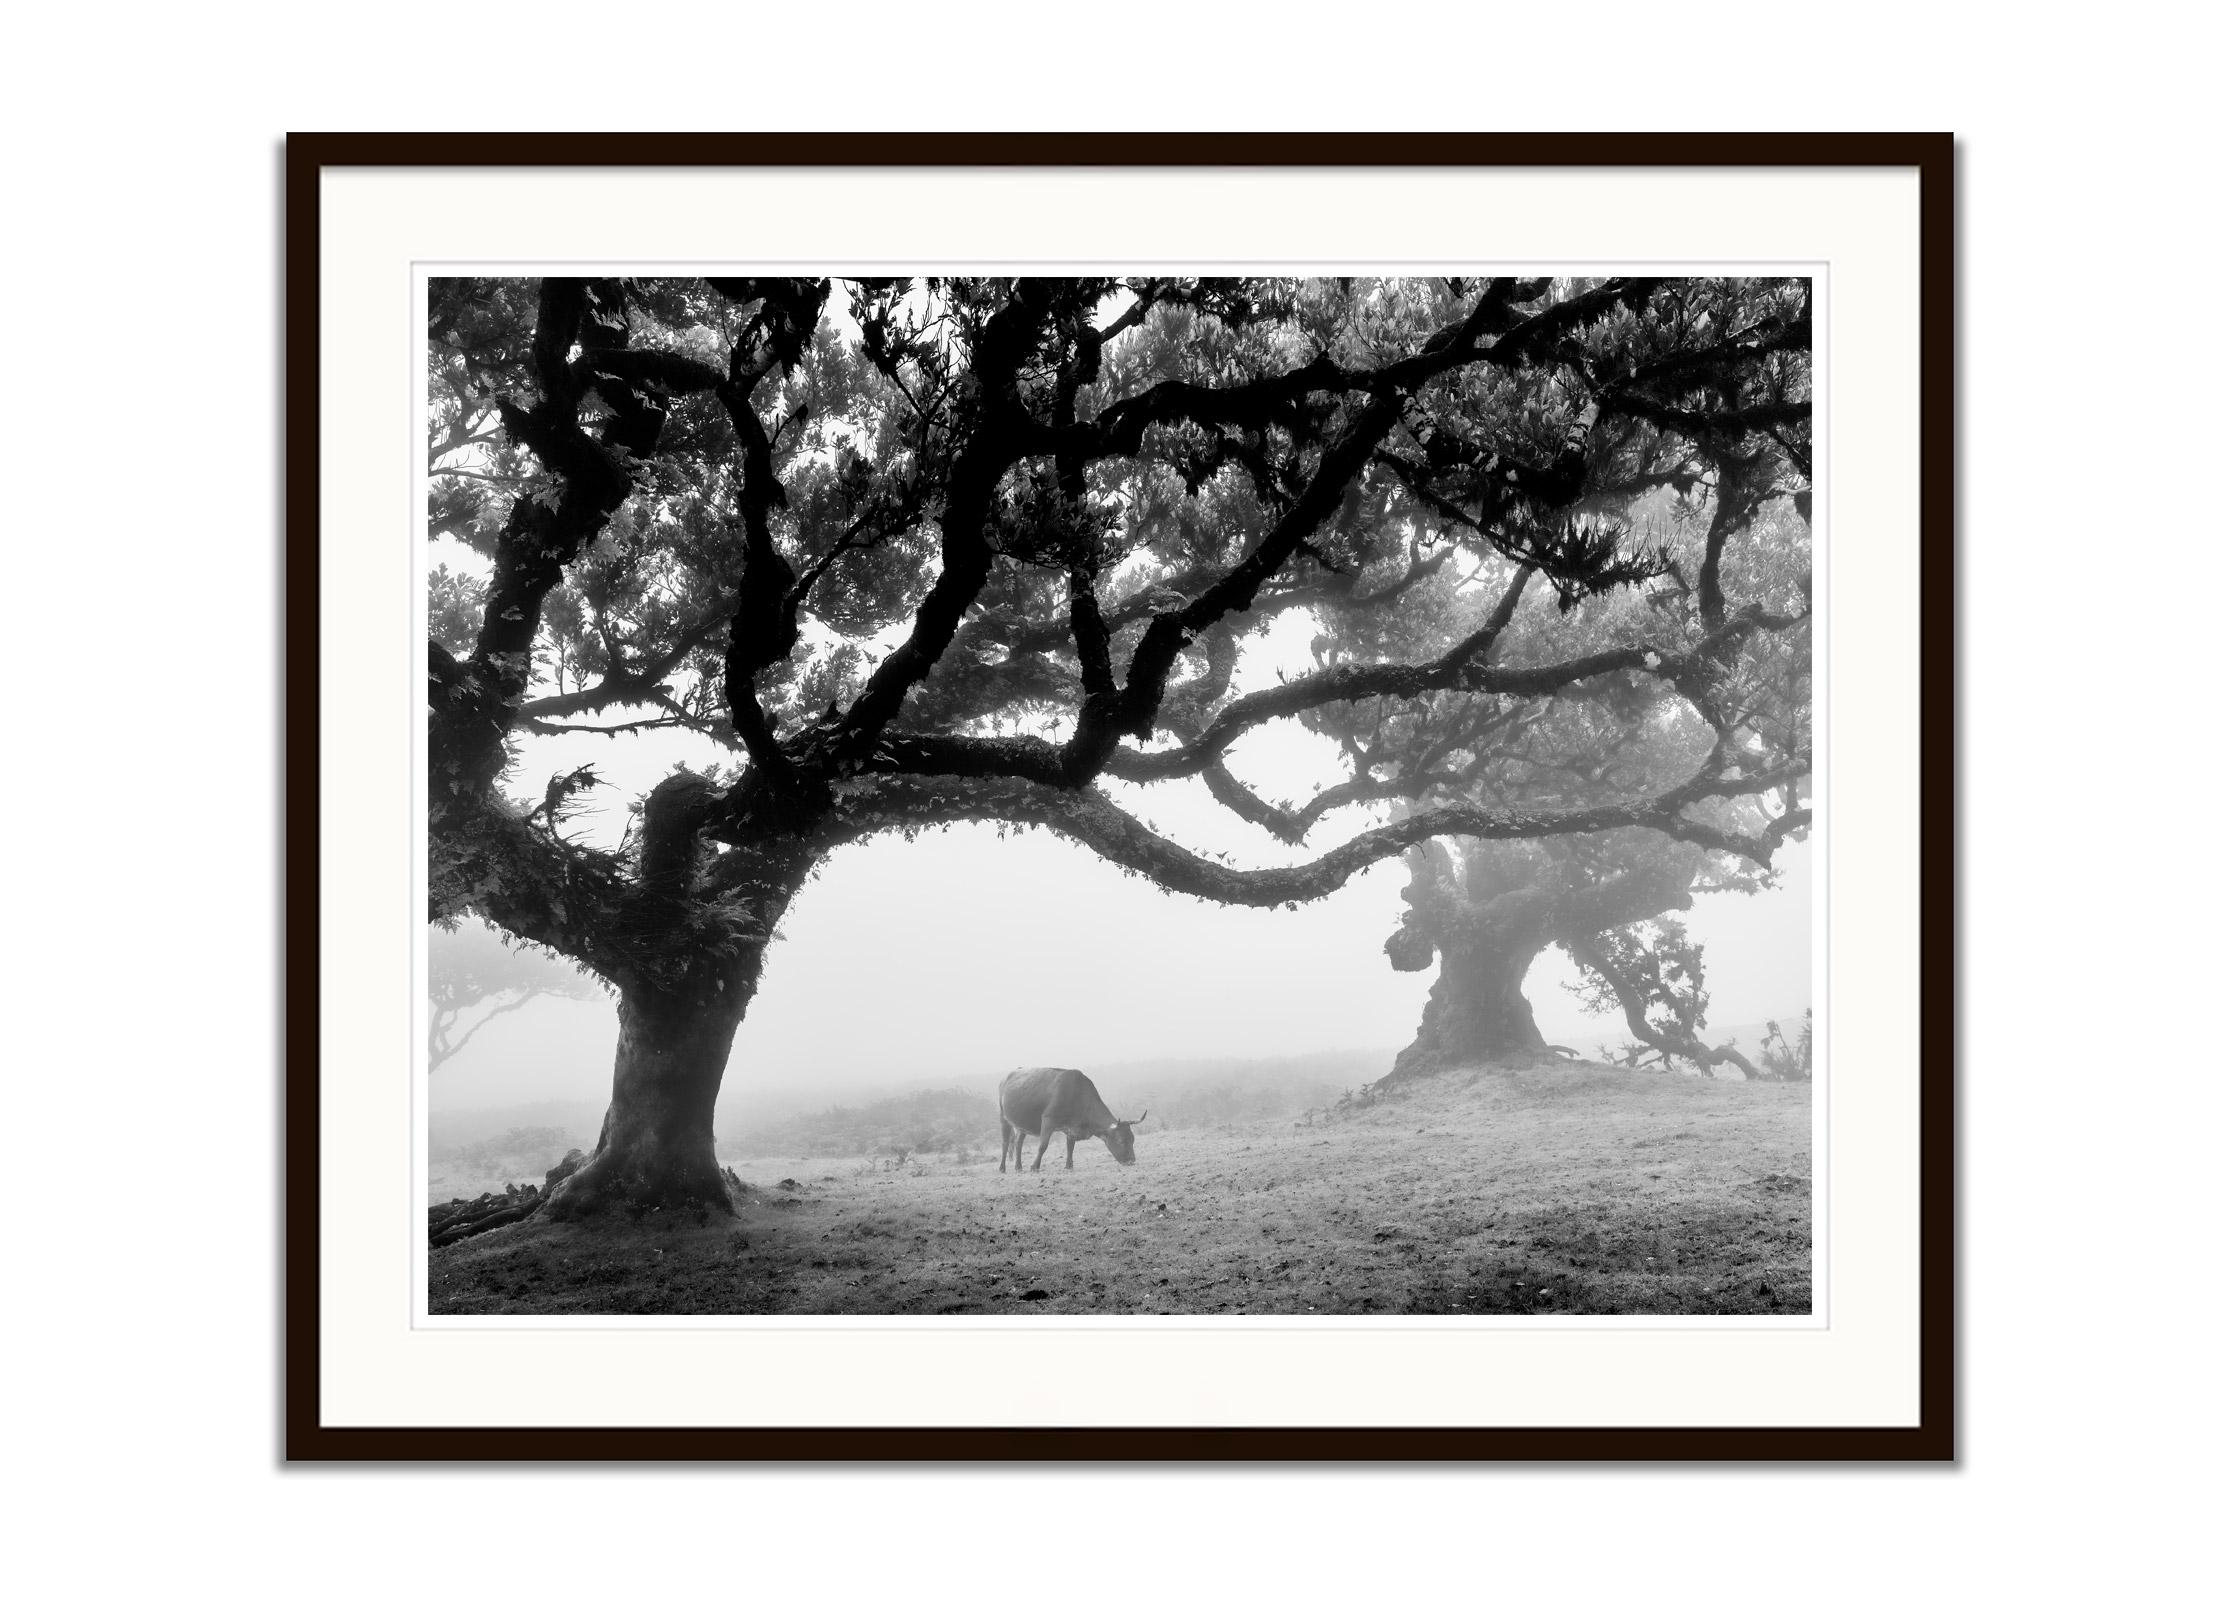 Cows on the foggy Pasture, Madeira, black and white, landscape photography - Black Landscape Photograph by Gerald Berghammer